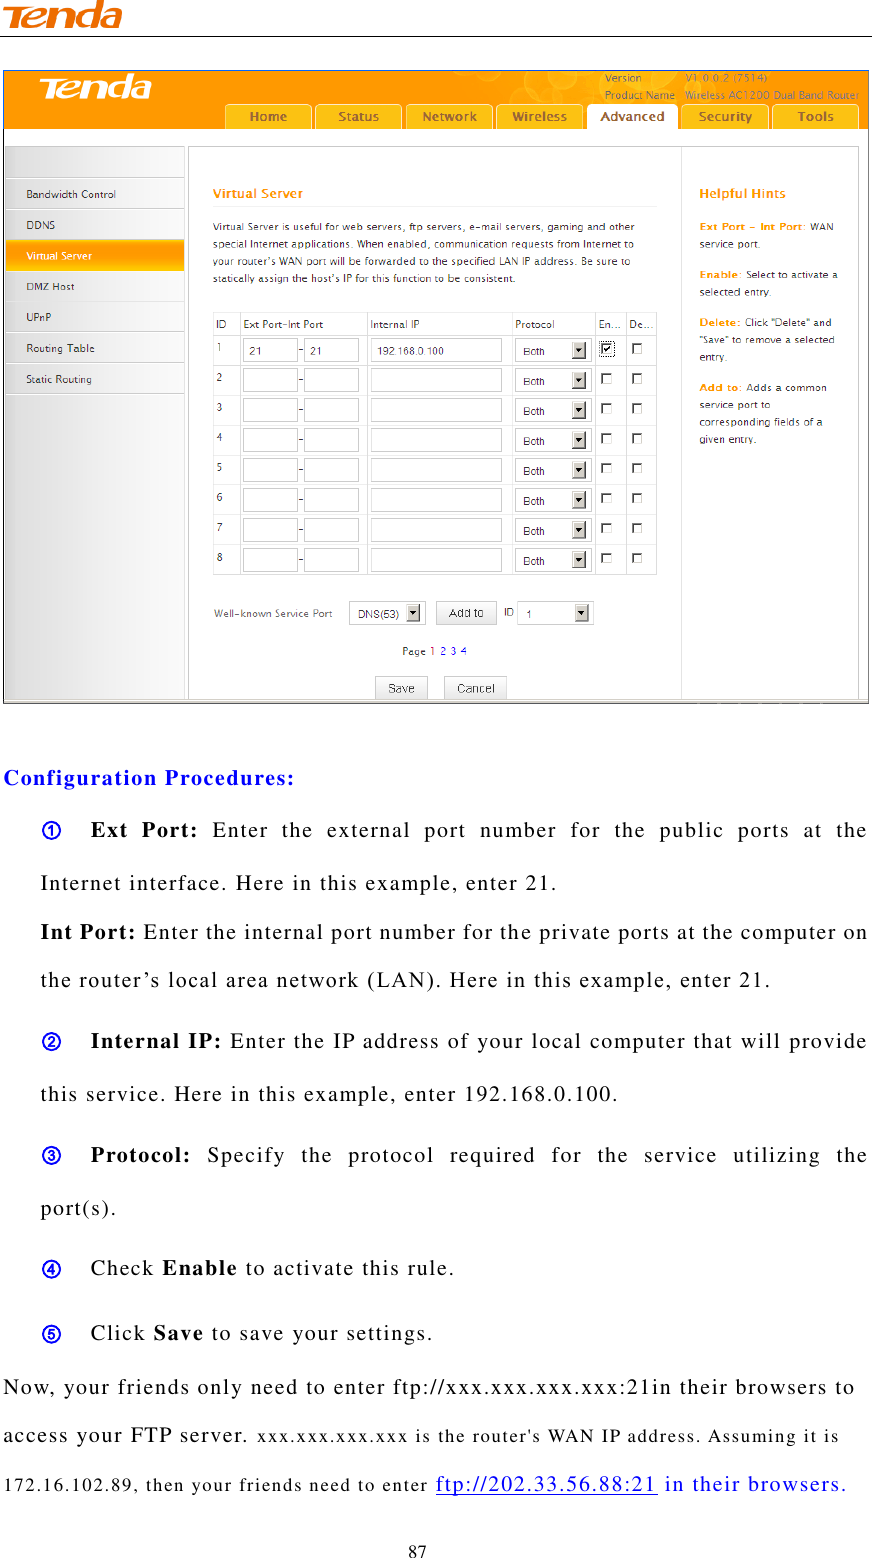                                    87   Configuration Procedures: ① Ext  Port:  Enter  the  external  port  number  for  the  public  ports  at  the Internet interface. Here in this example, enter 21. Int Port: Enter the internal port number for the private ports at the computer on the router ’s local area network (LAN). Here in this example, enter 21.  ② Internal IP: Enter the IP address of your local computer that will provide this service. Here in this example, enter 192.168.0.100. ③ Protocol:  Specify  the  protocol  required  for  the  service  utilizing  the port(s). ④ Check Enable to activate this rule. ⑤ Click Save to save your settings. Now, your friends only need to enter ftp://xxx.xxx.xxx.xxx:21in their browsers to access your FTP server. xxx.xxx.xxx.xxx is the router&apos;s WAN IP address. Assuming it is 172.16.102.89, then your friends need to enter ftp://202.33.56.88:21 in their browsers. 